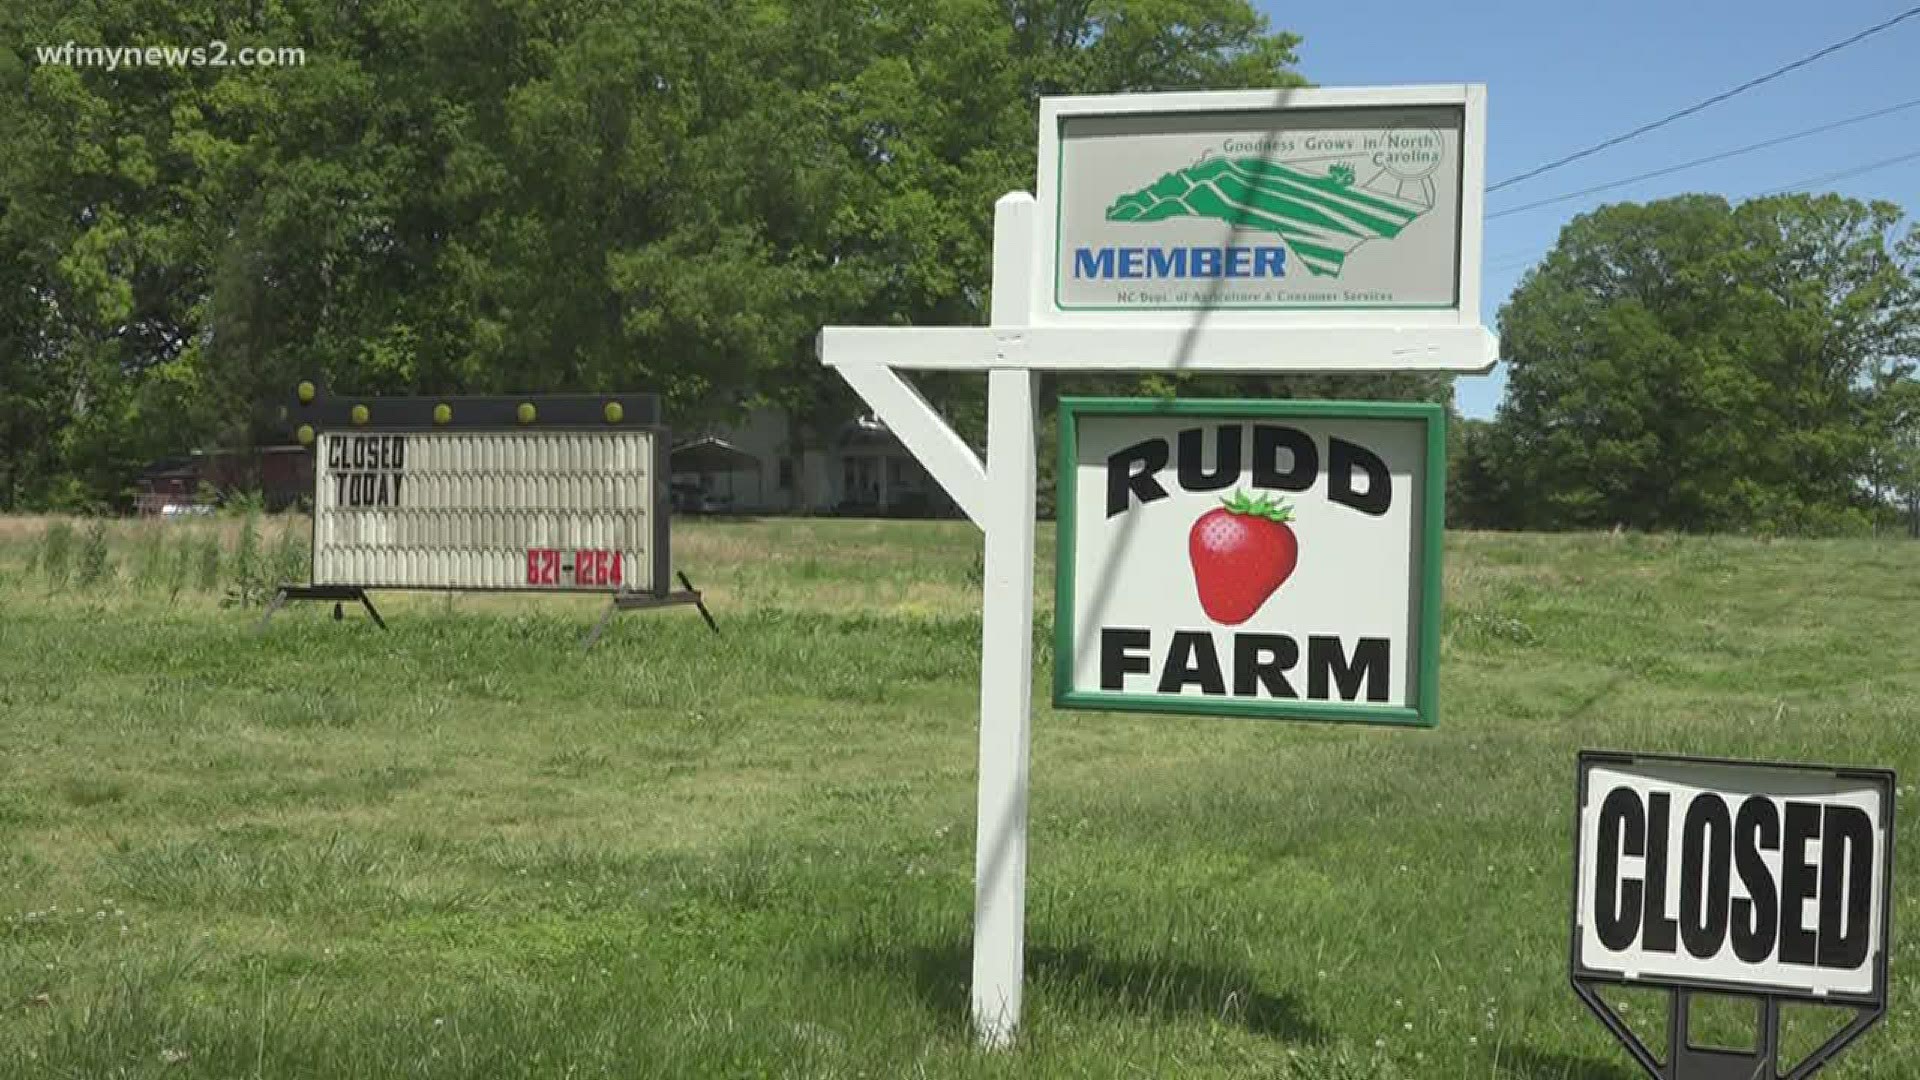 Rudd Farm remains closed due to several employees testing positive for coronavirus. The farm won't open for at least two weeks.